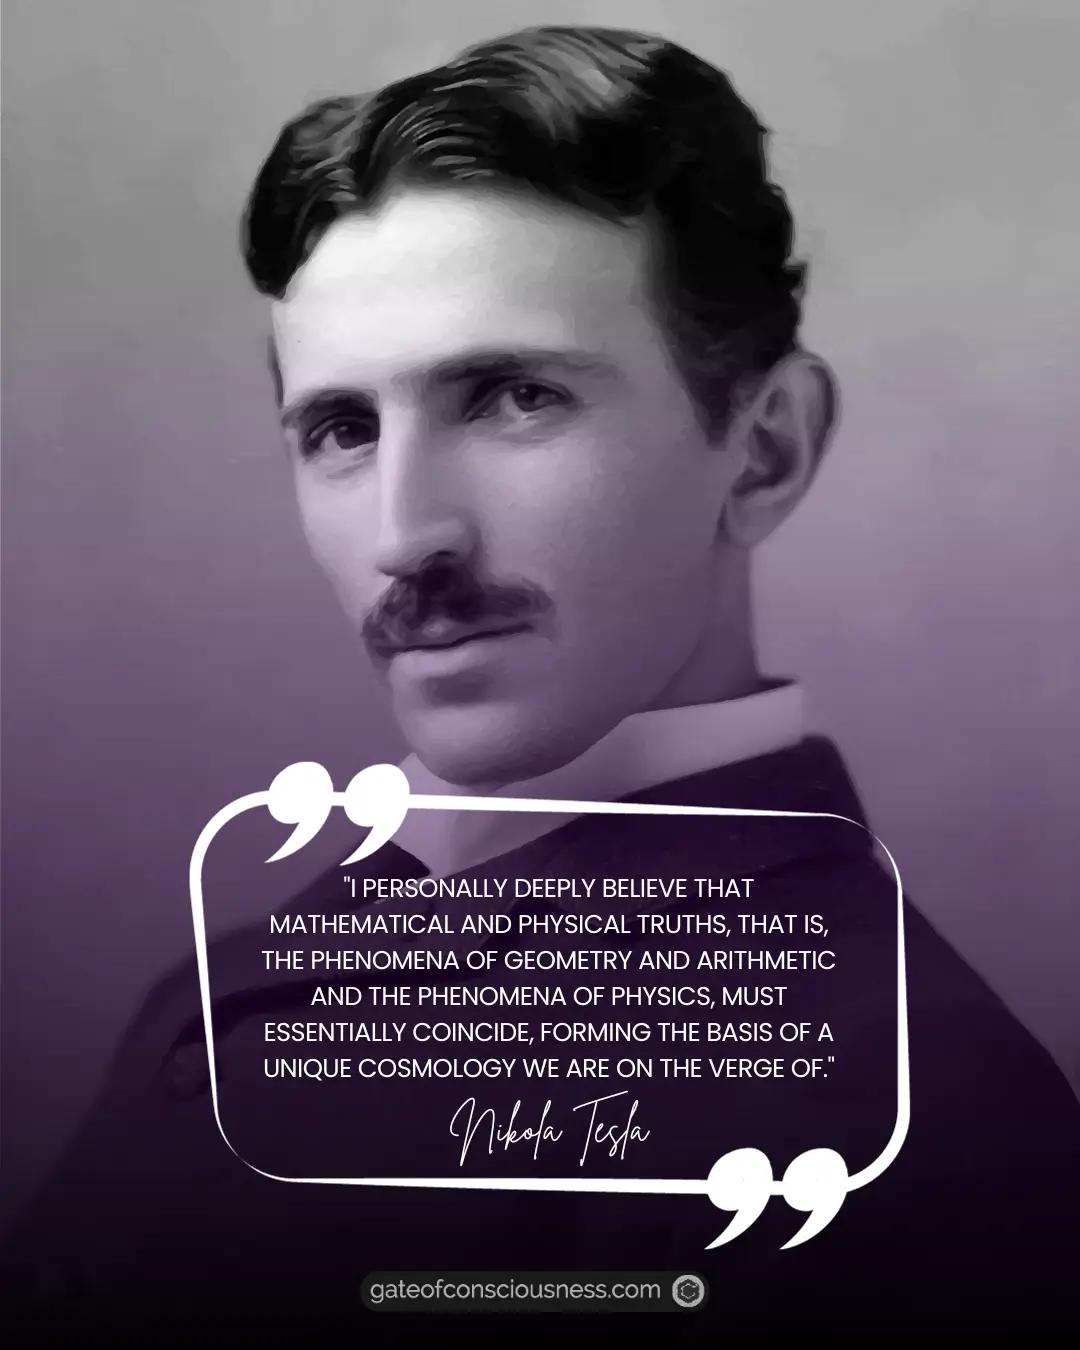 An image of Nikola Tesla with his quote on it.